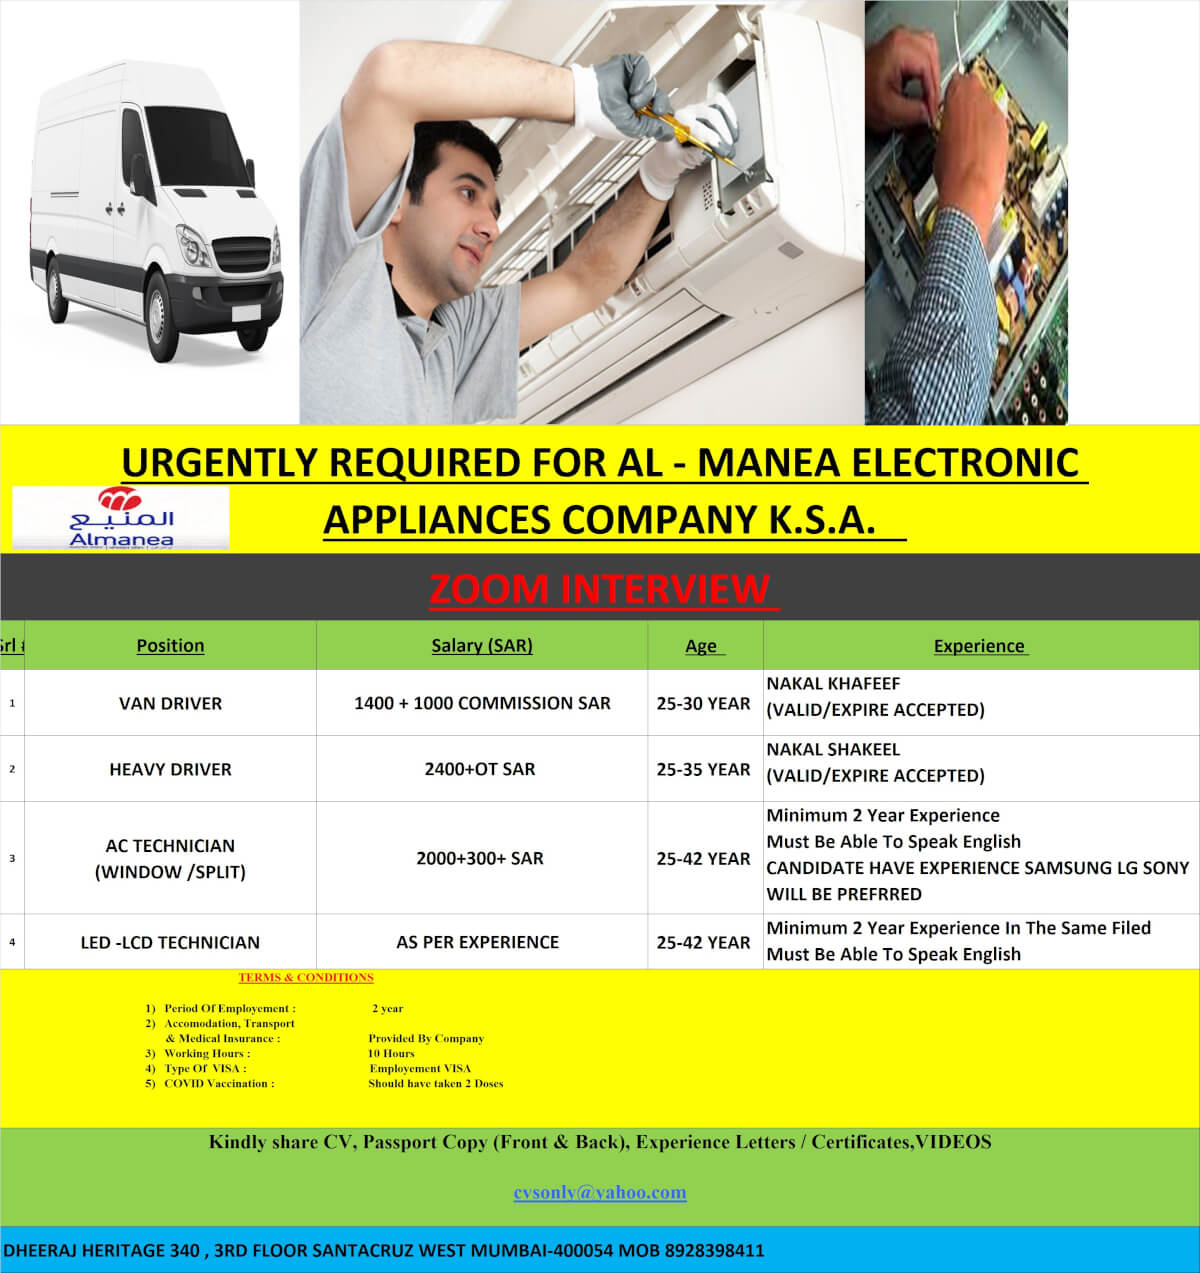 URGENTLY REQUIRED FOR AL MANEA COMPANY DAMMAM K.S.A.